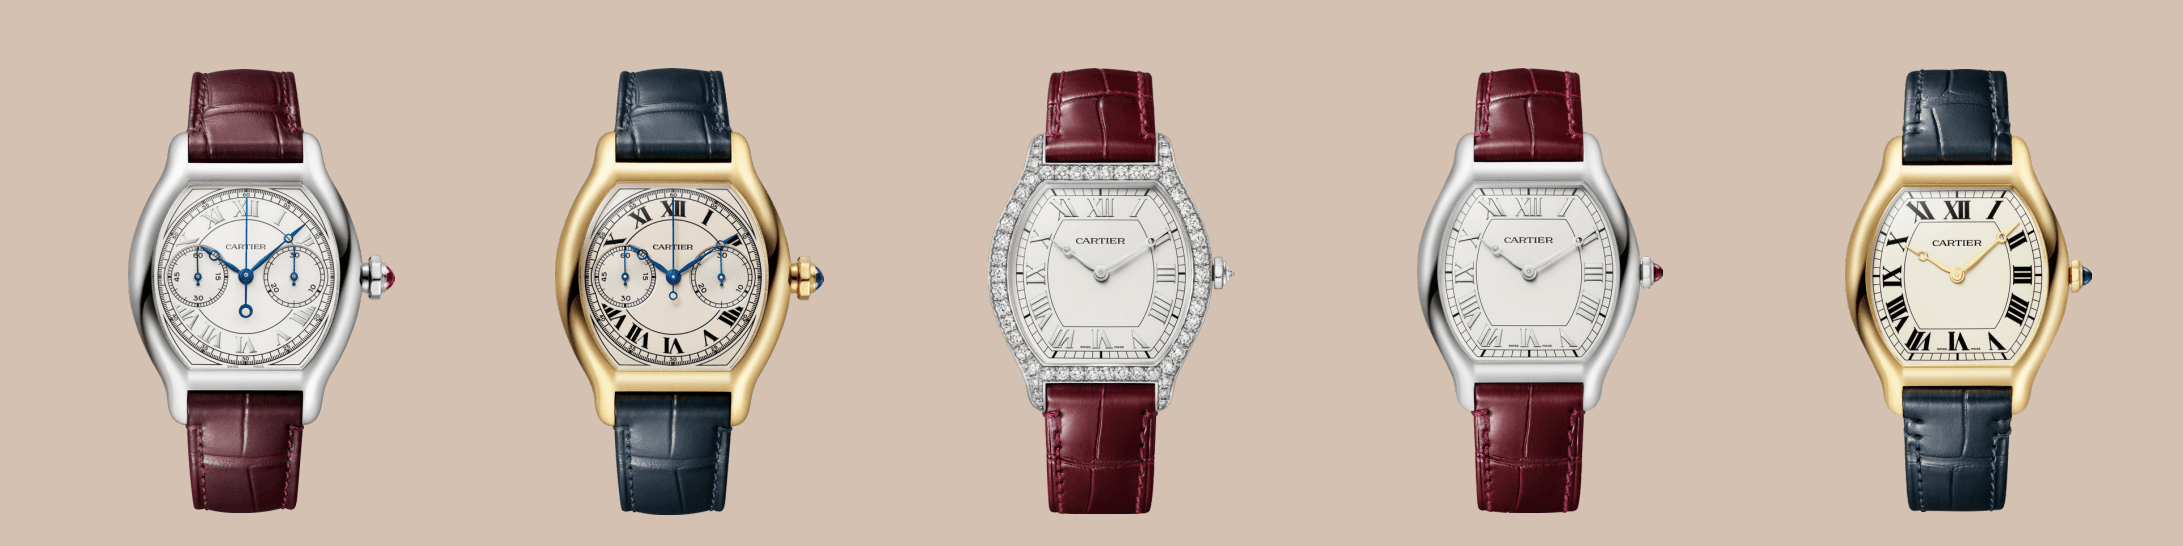 Cartier Prive Tortue Watches